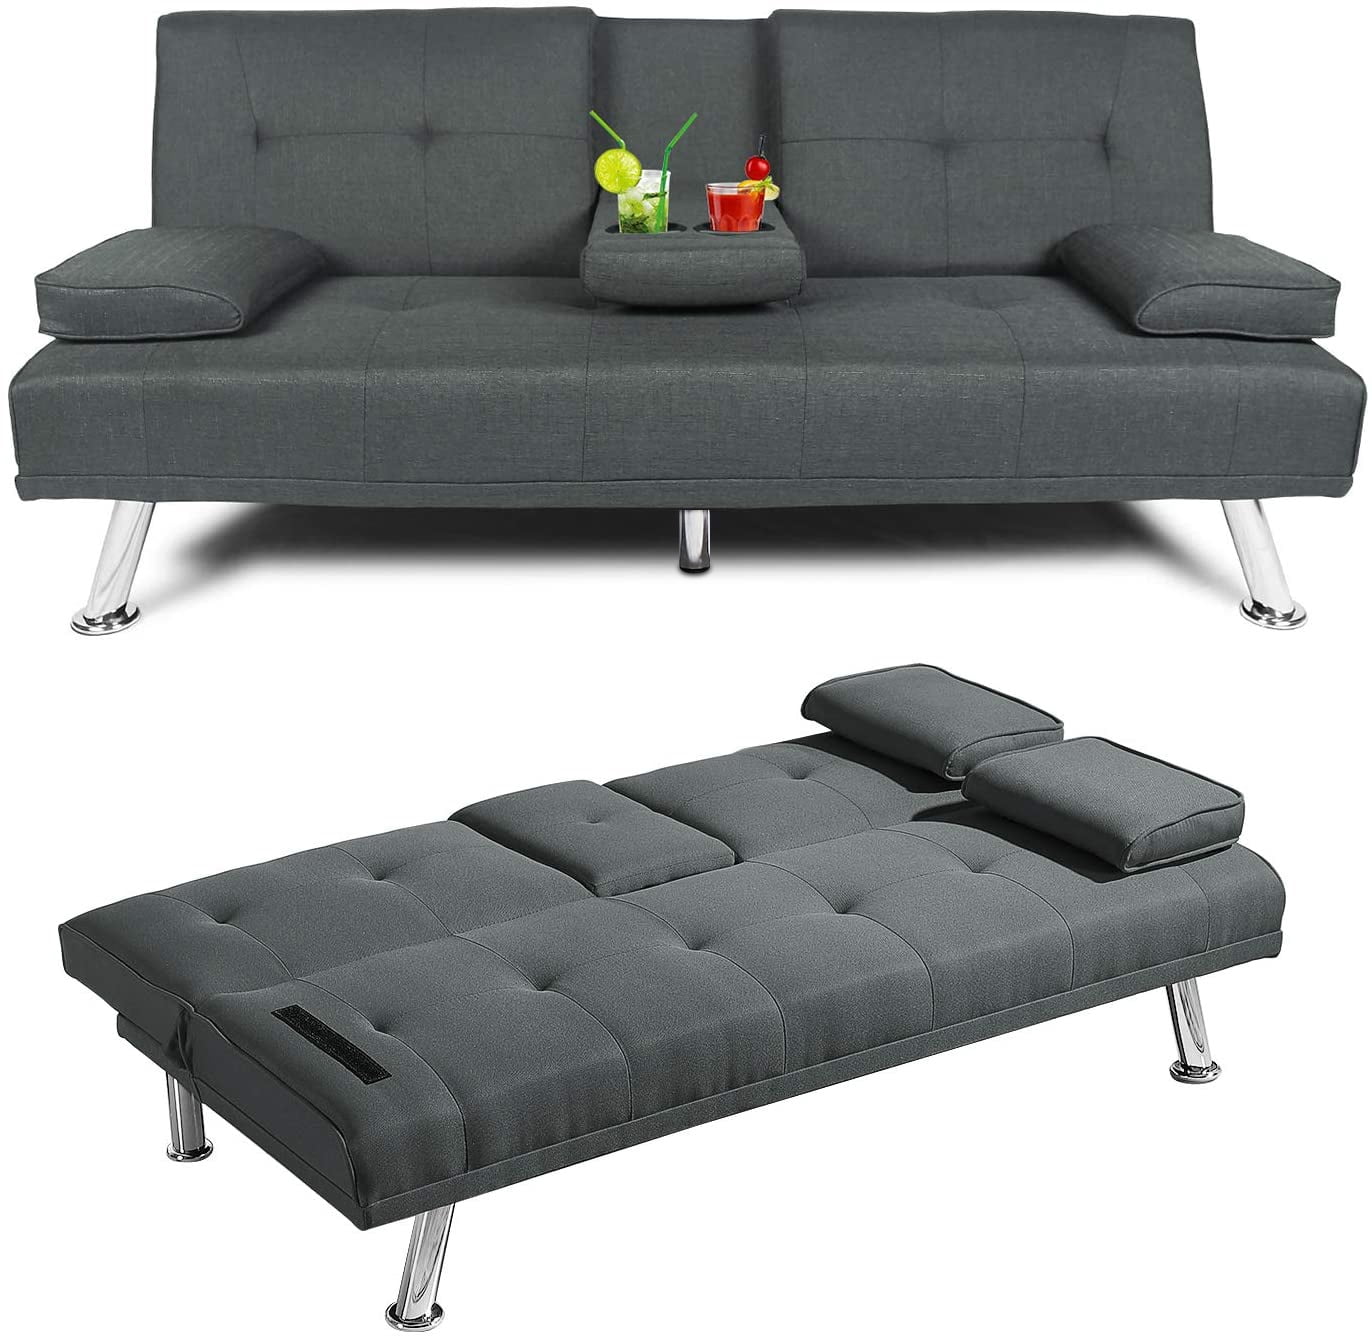 Details about   Futon Sofa Bed Couch Sleeper Convertible Loveseat Living Room Chair w/Cup Holder 